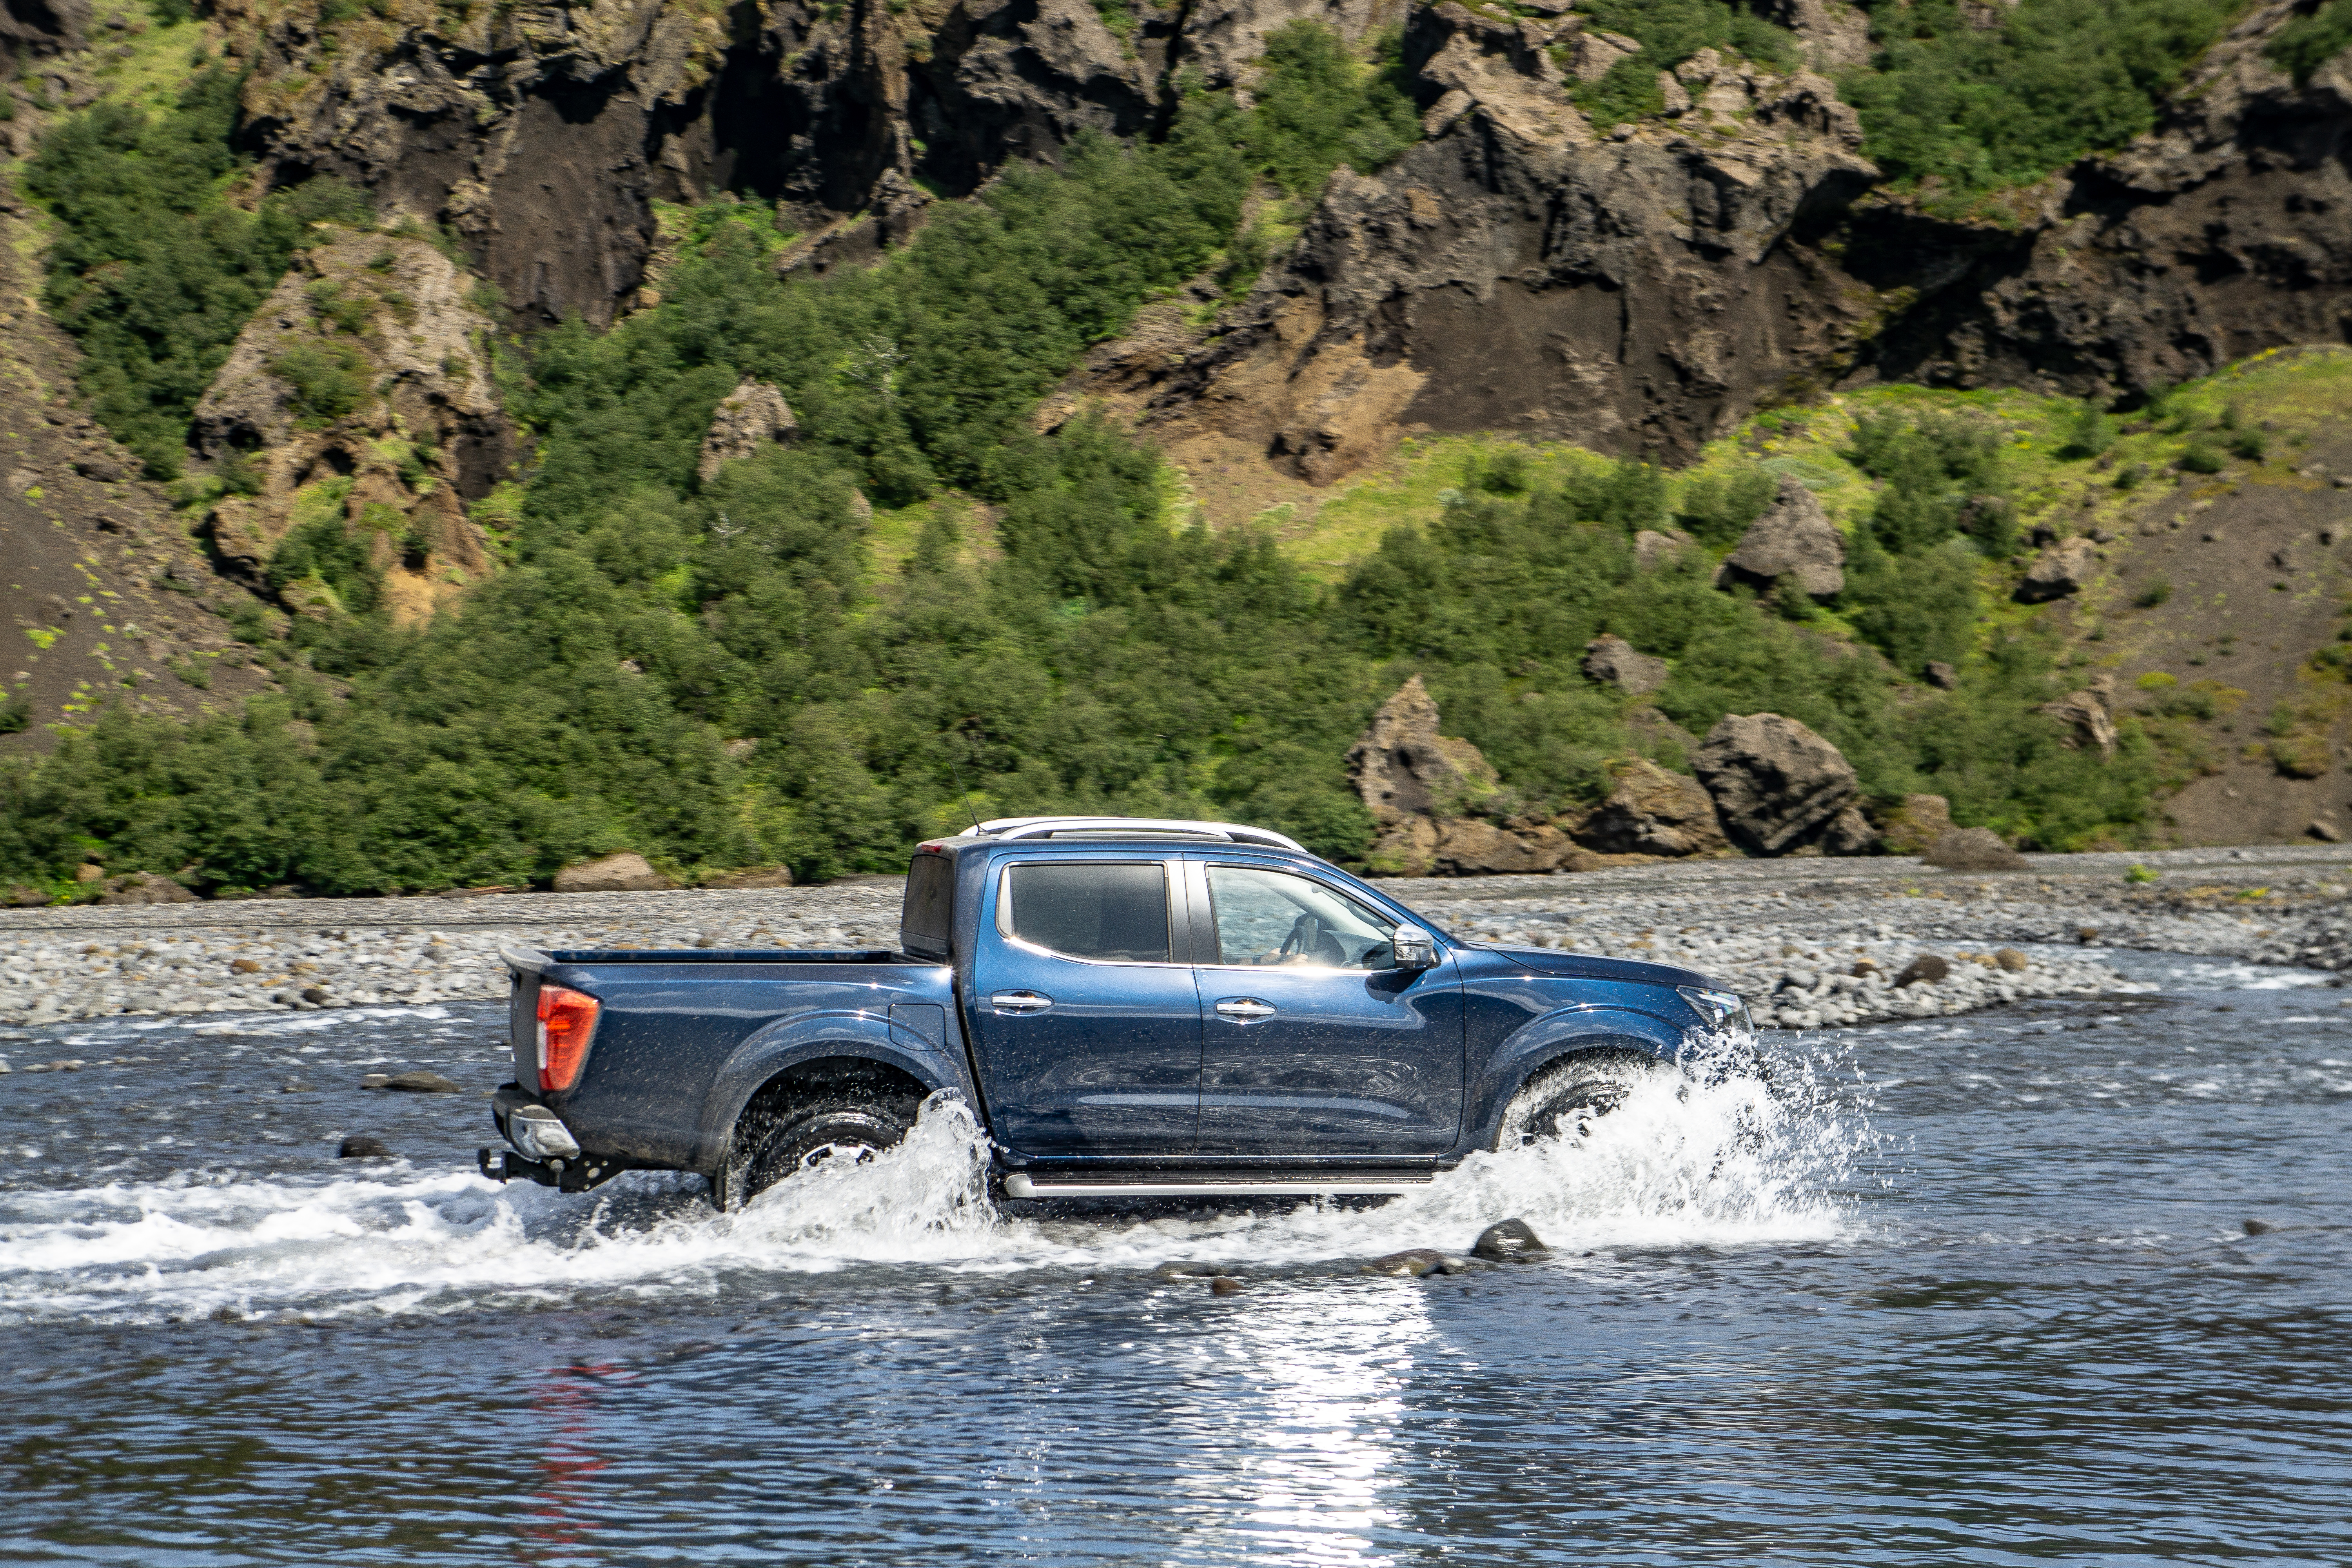 The Navara's wading ability is put to the test